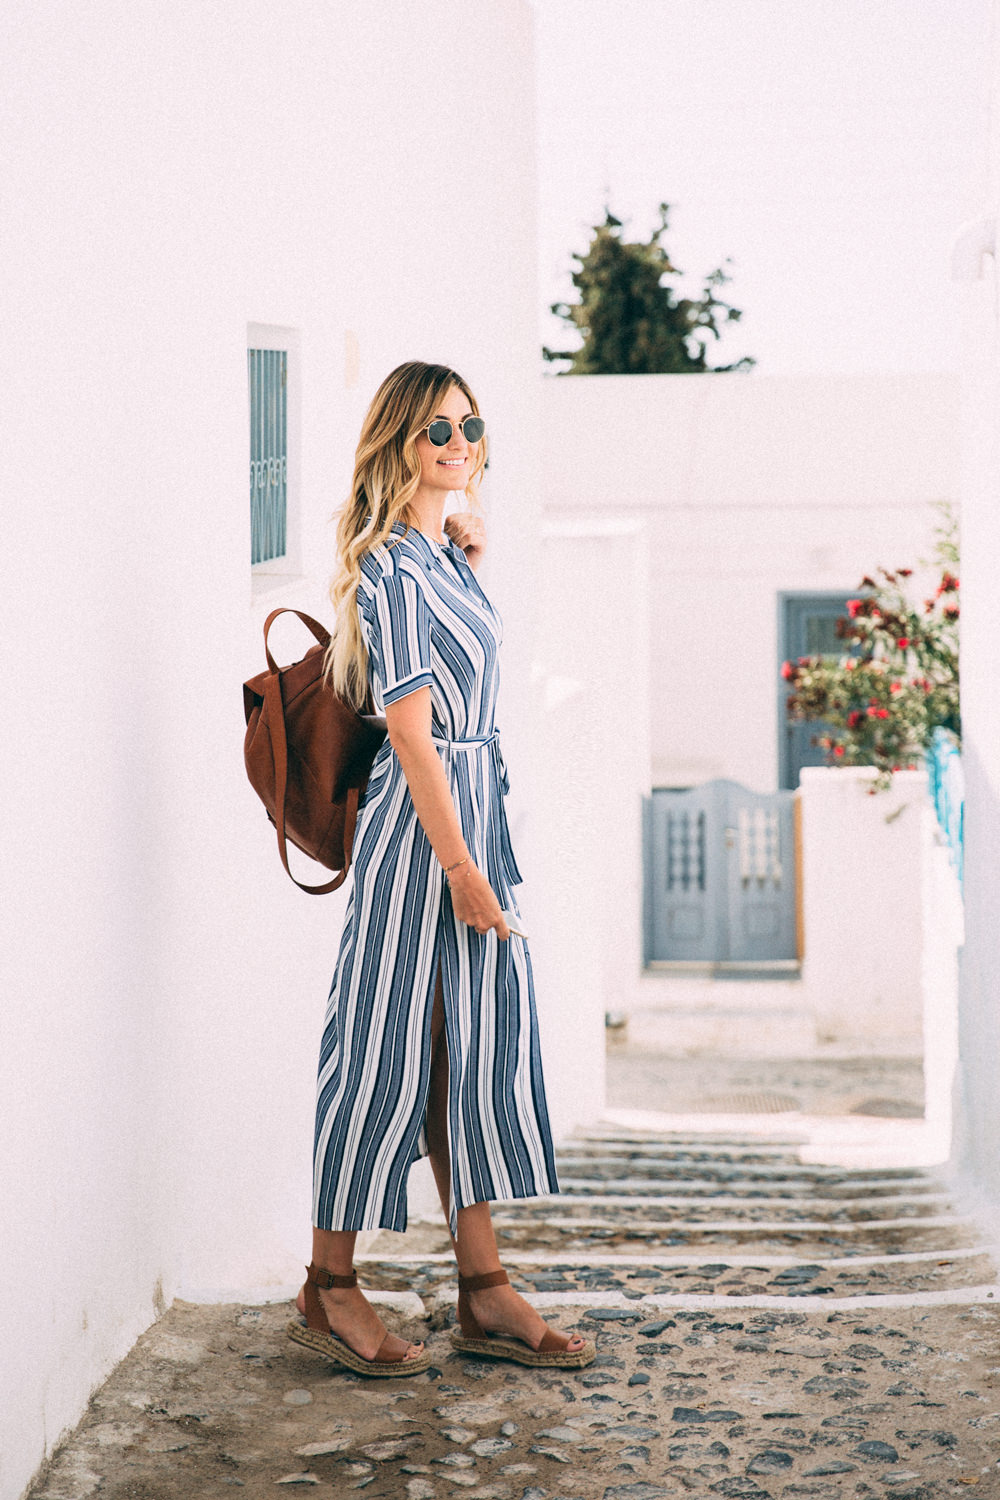 Caitlin Lindquist of the fashion and travel blog, Dash of Darling, shares her adventures in Pyrgos, Santorini Greece with Royal Caribbean Cruises in September.